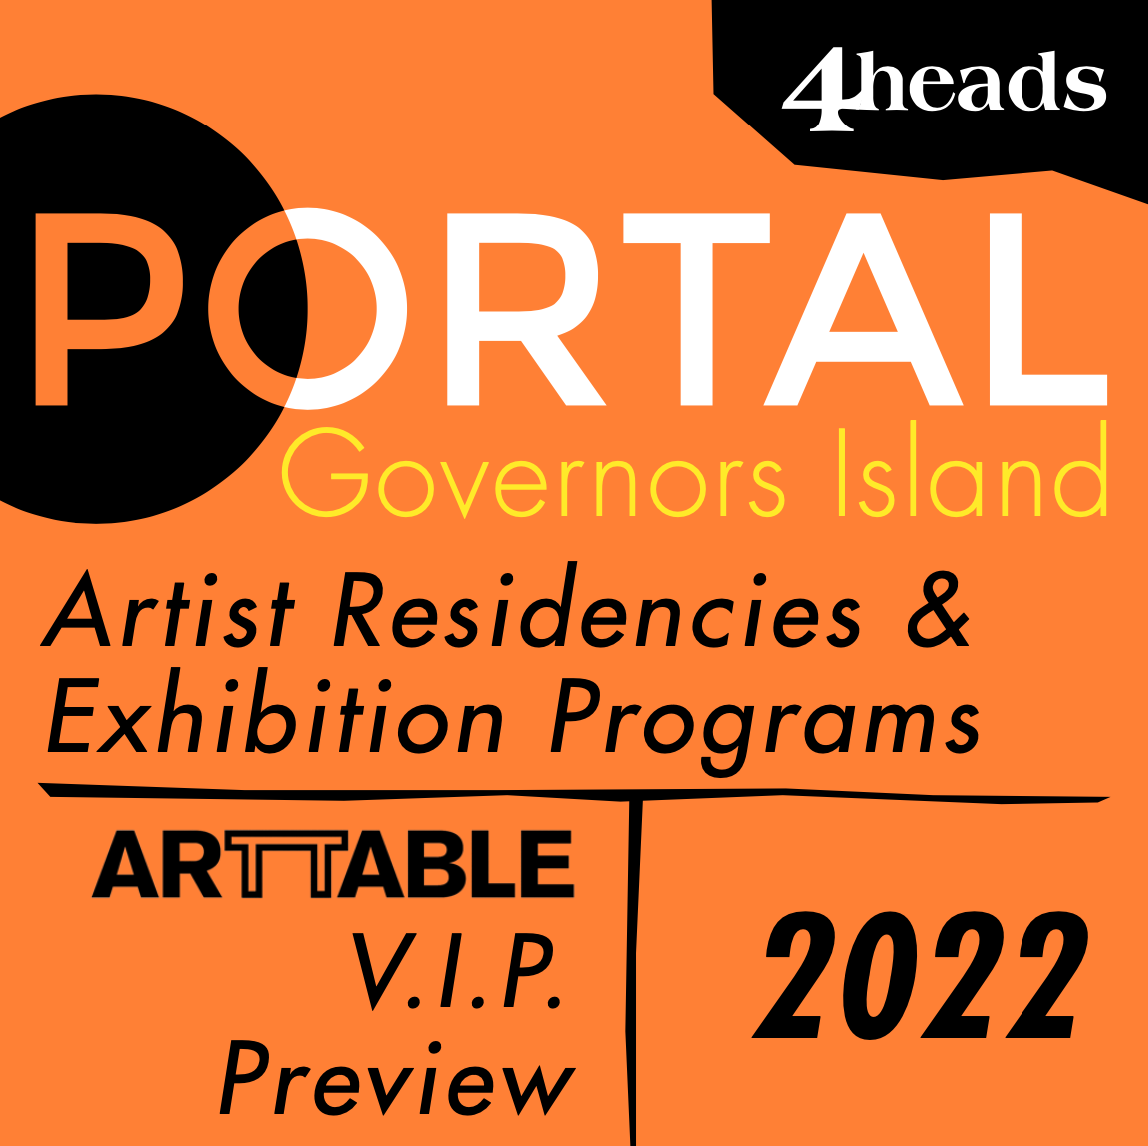 New York | VIP Preview at 4Heads Artists-in-Residence Portal Art Fair on Governors Island